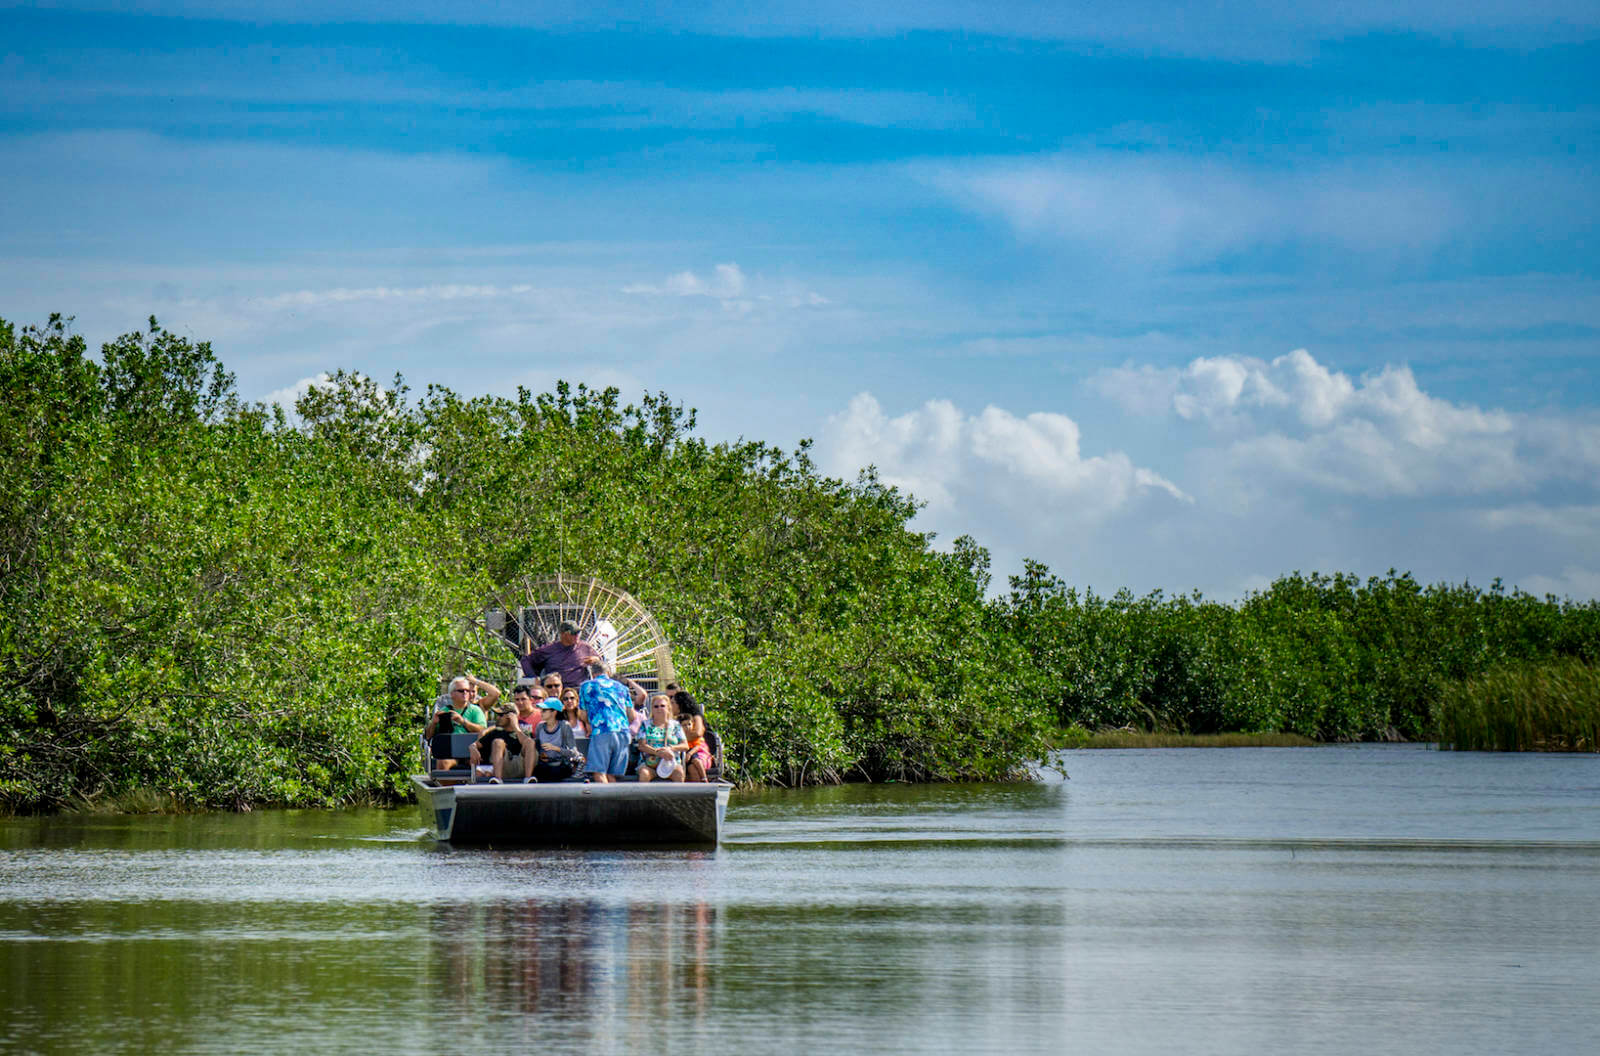 Few activities can beat an Everglades airboat tour. These flat-bottomed boats powered by a giant propeller zip through the sawgrass at speeds of up to 25mph. Although noisy (protective ear headsets are provided to riders), they skim over the surface of the Everglades, minimizing disruption to the native wildlife. Photo by Jennifer Brinkman. Must Do Visitor Guides, MustDo.com.